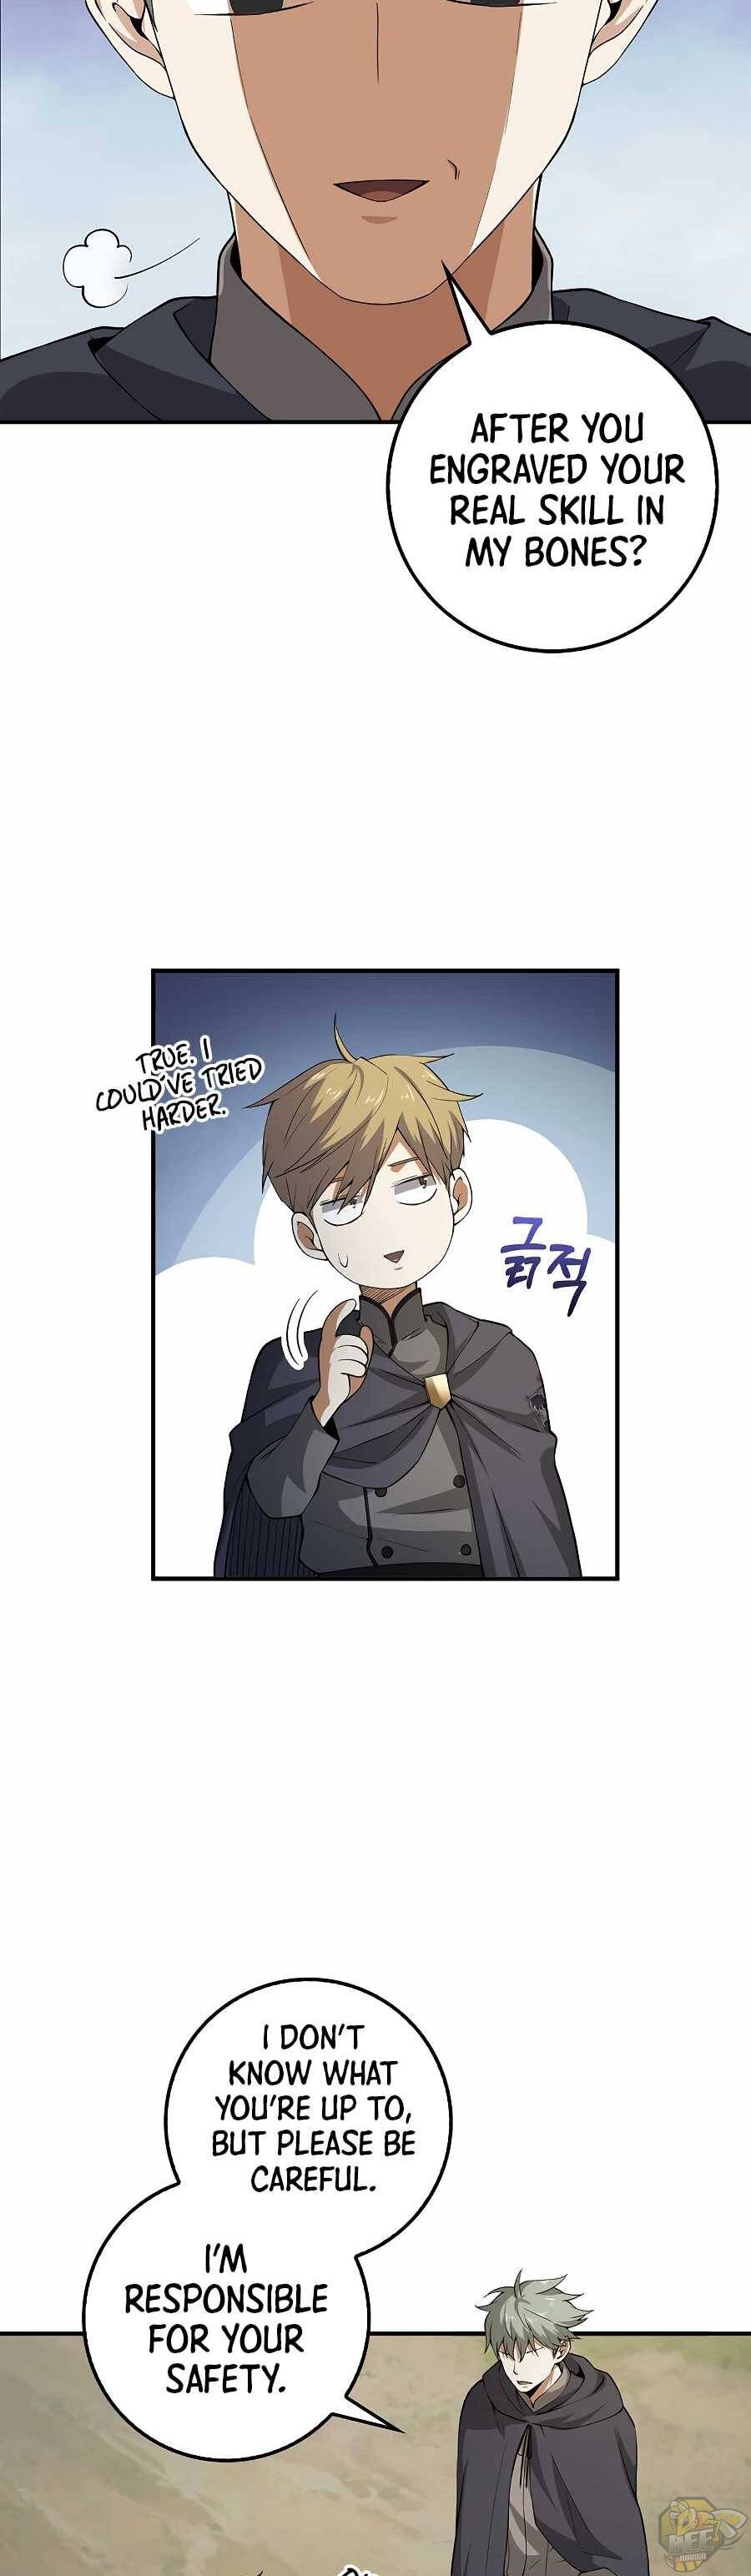 The Lord’s Coins Aren’t Decreasing?! Chapter 30 - HolyManga.net